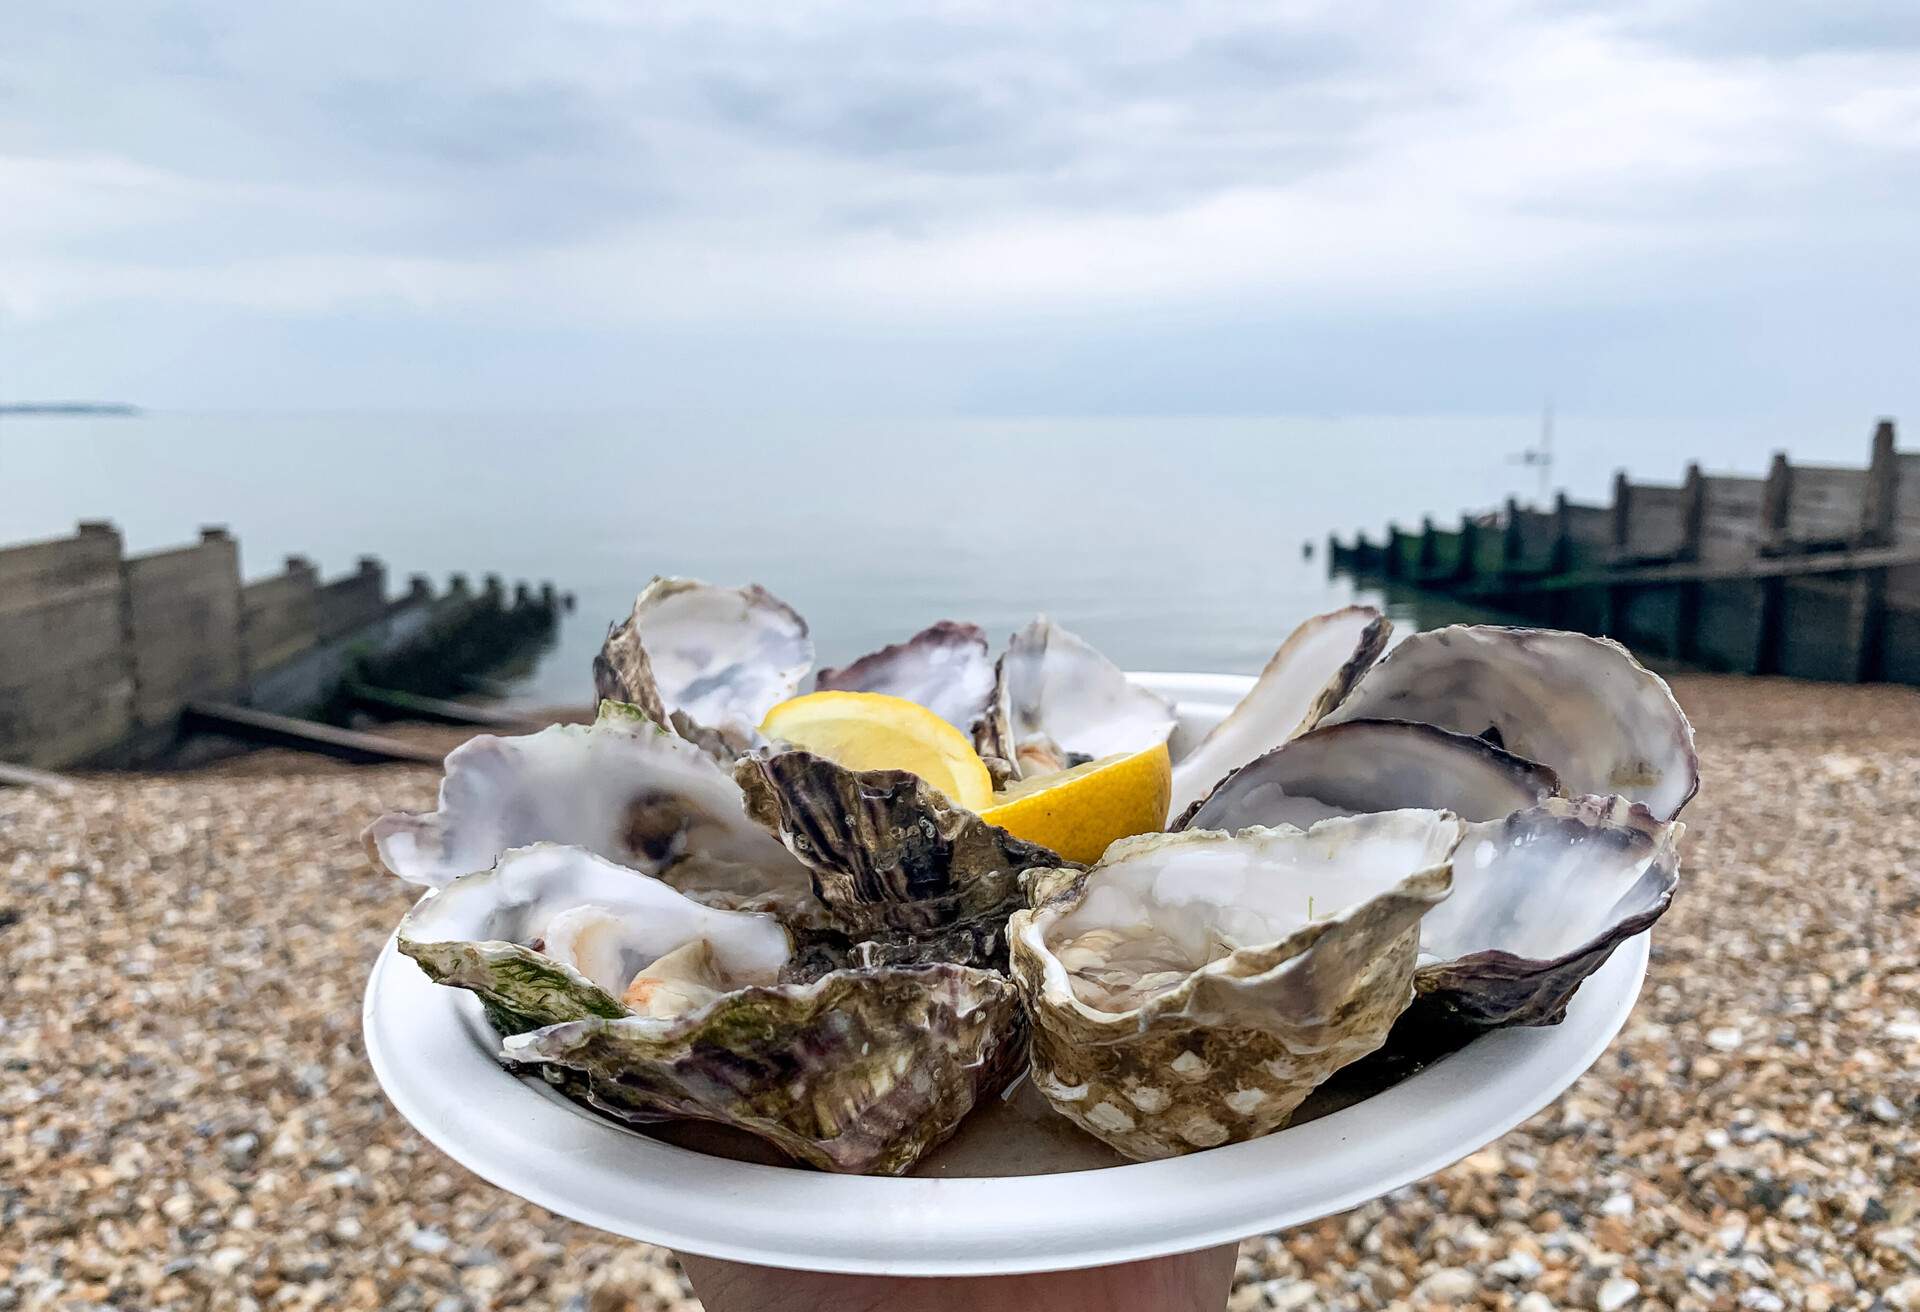 Picnic by the sea hand holding plate with dozen of fresh oysters lemon wedges twilight pebble beach. Take away food. Eating away.